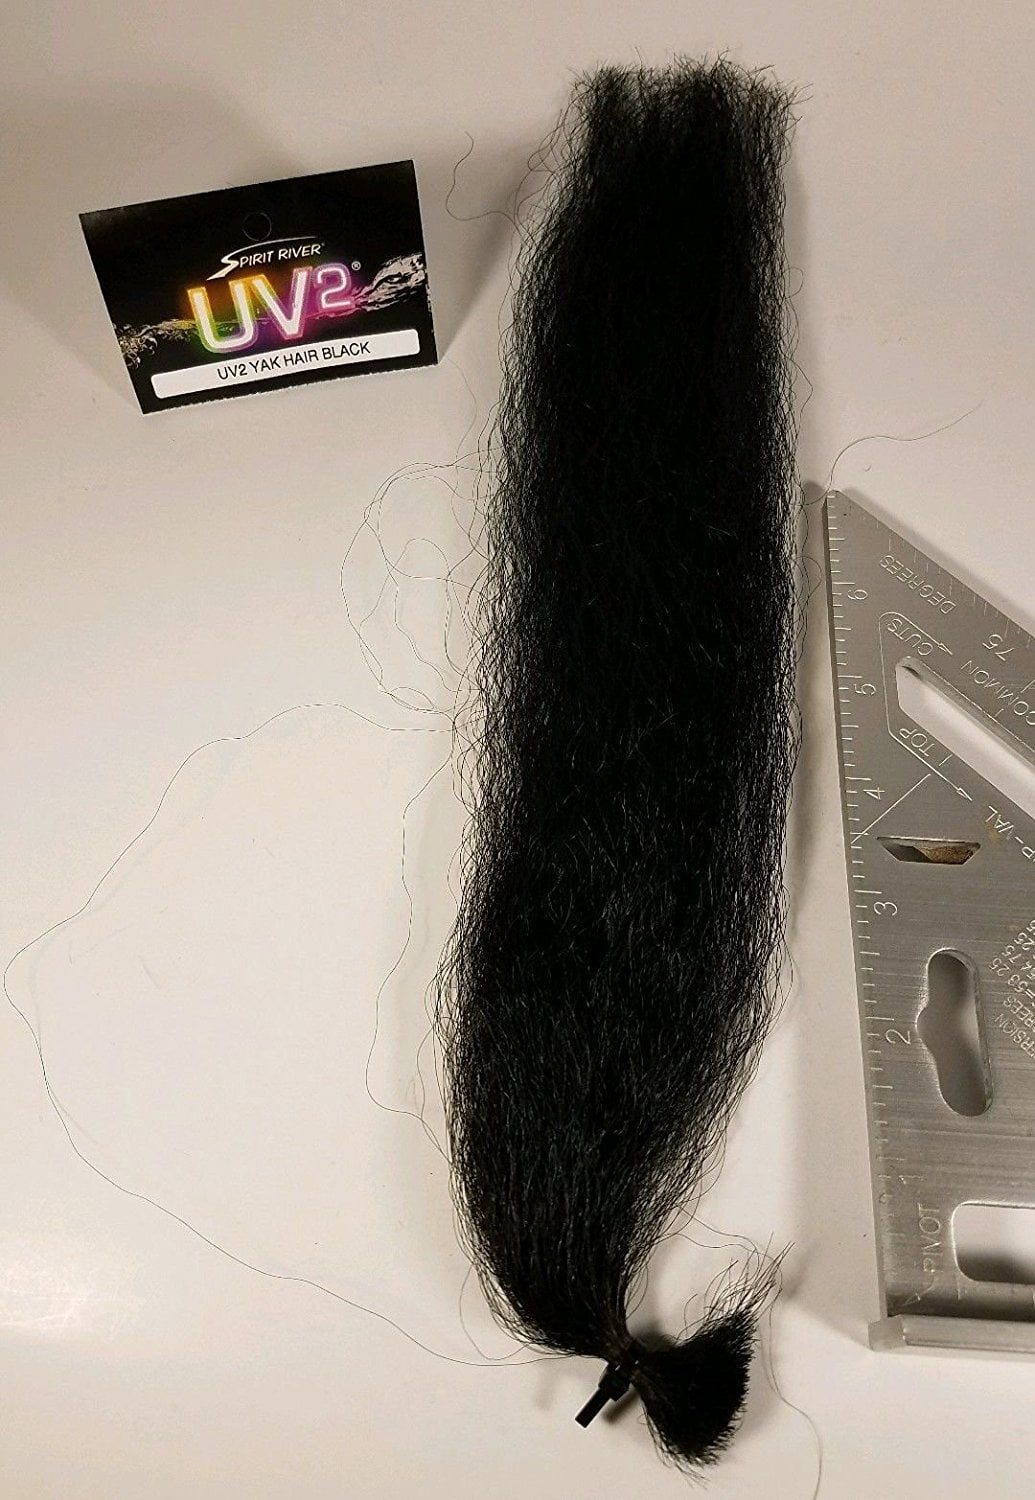 Saltwater Yak Hair 30 available pick any 3 for $10 